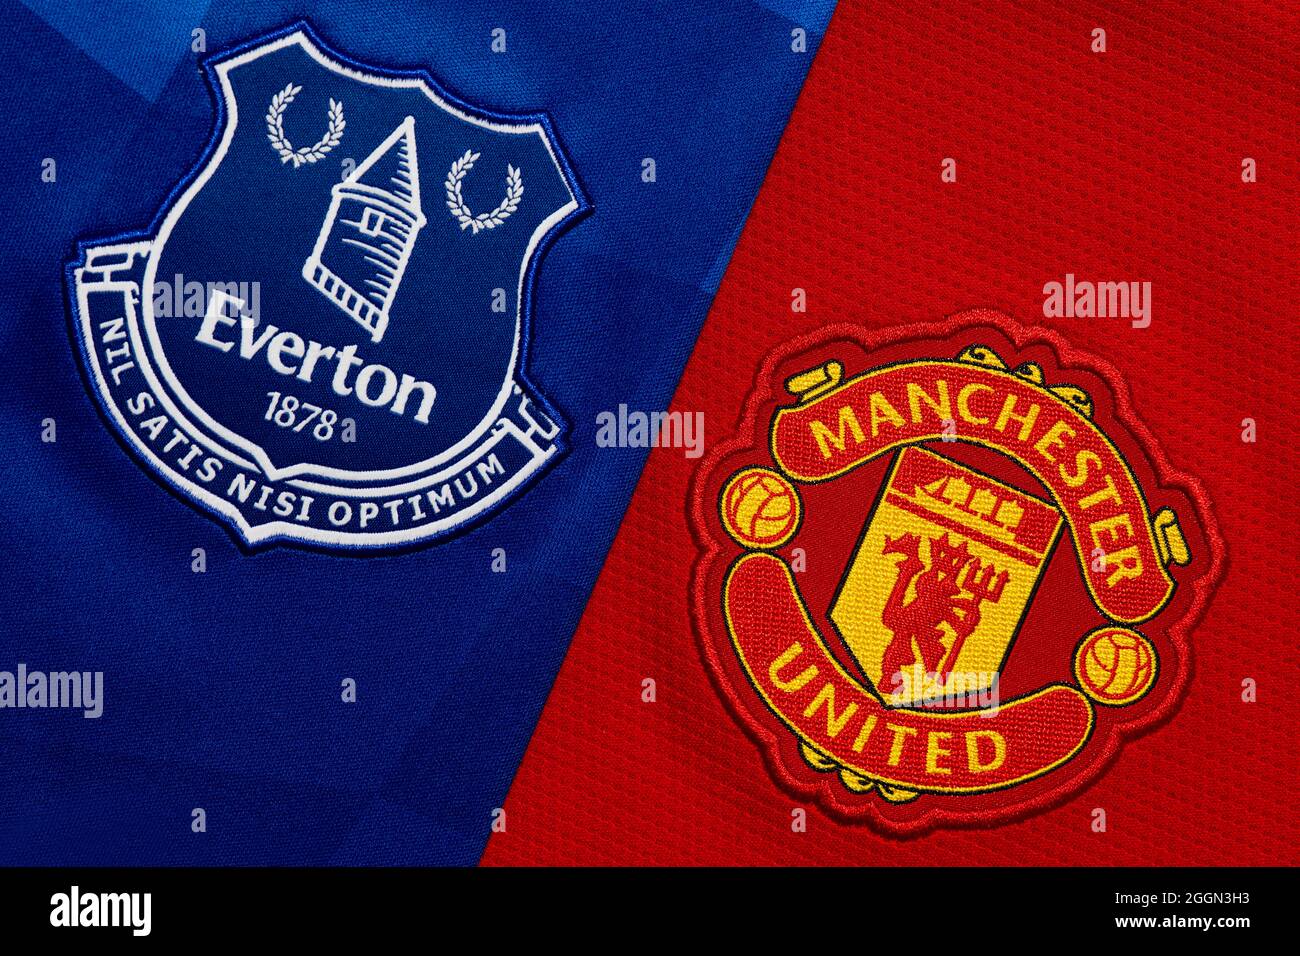 Close up of Manchester United & Everton club crest. Stock Photo